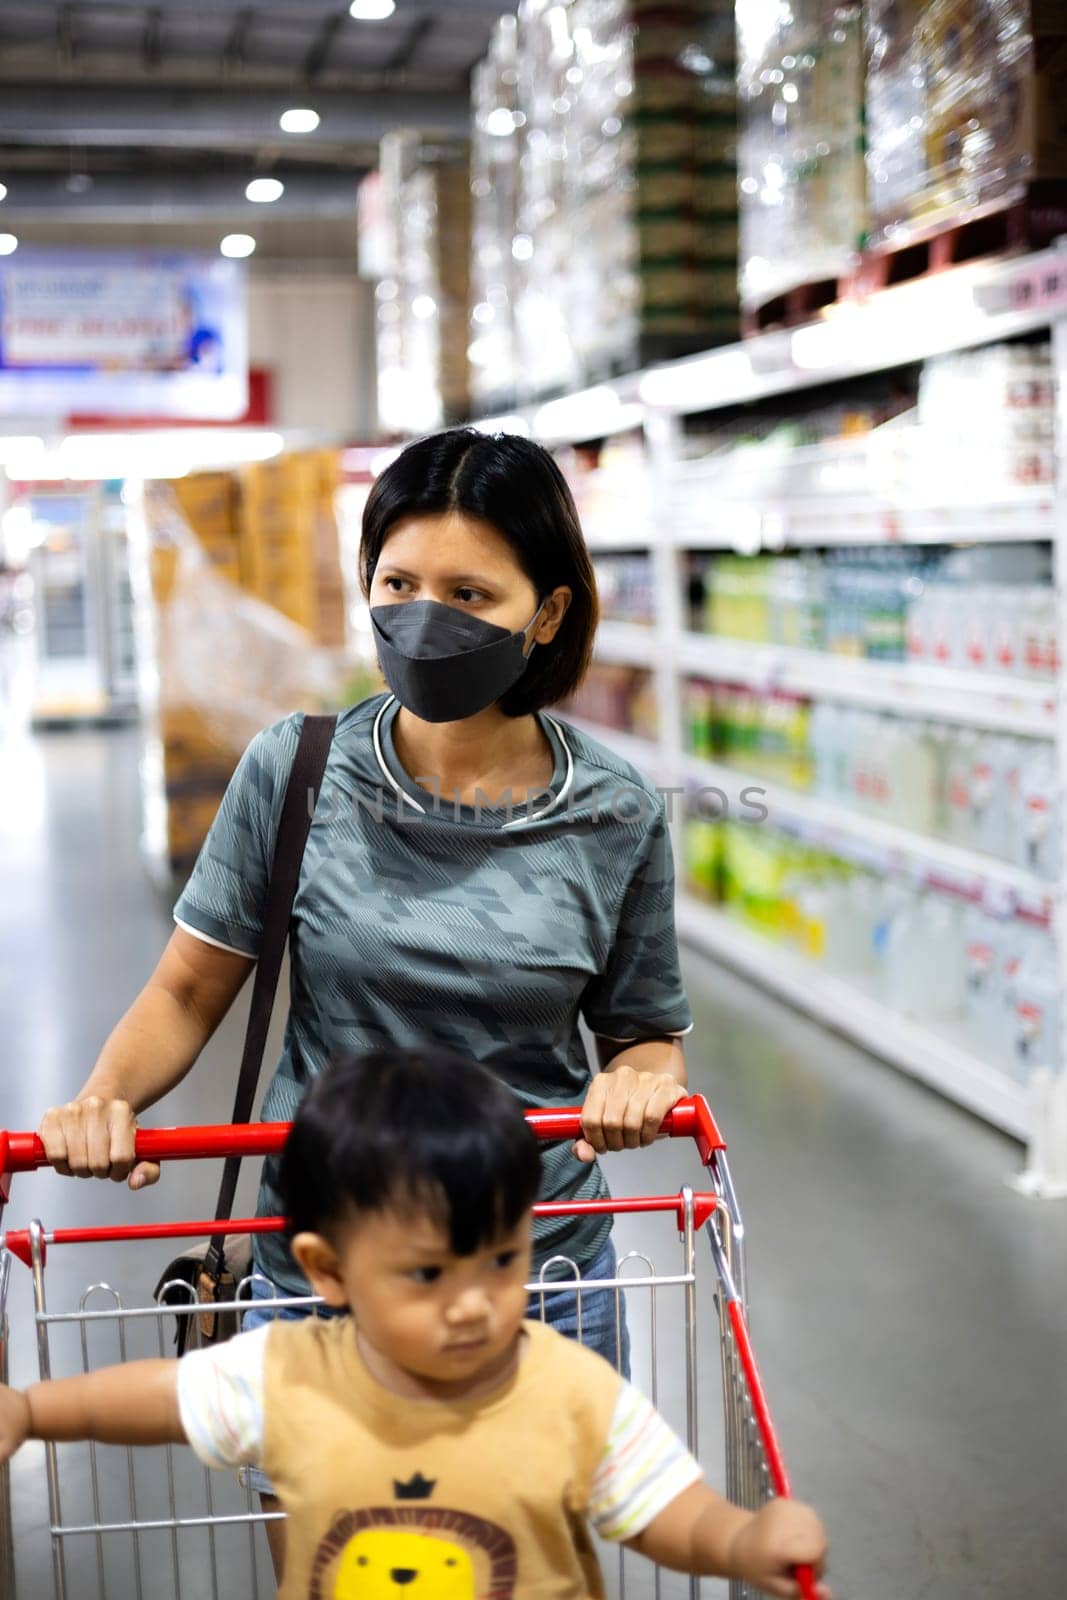 Mother pushing shopping cart with her infant baby boy child down department aisle in supermarket grocery store. Mother And Son At The Supermarket. Shopping with kids concept.